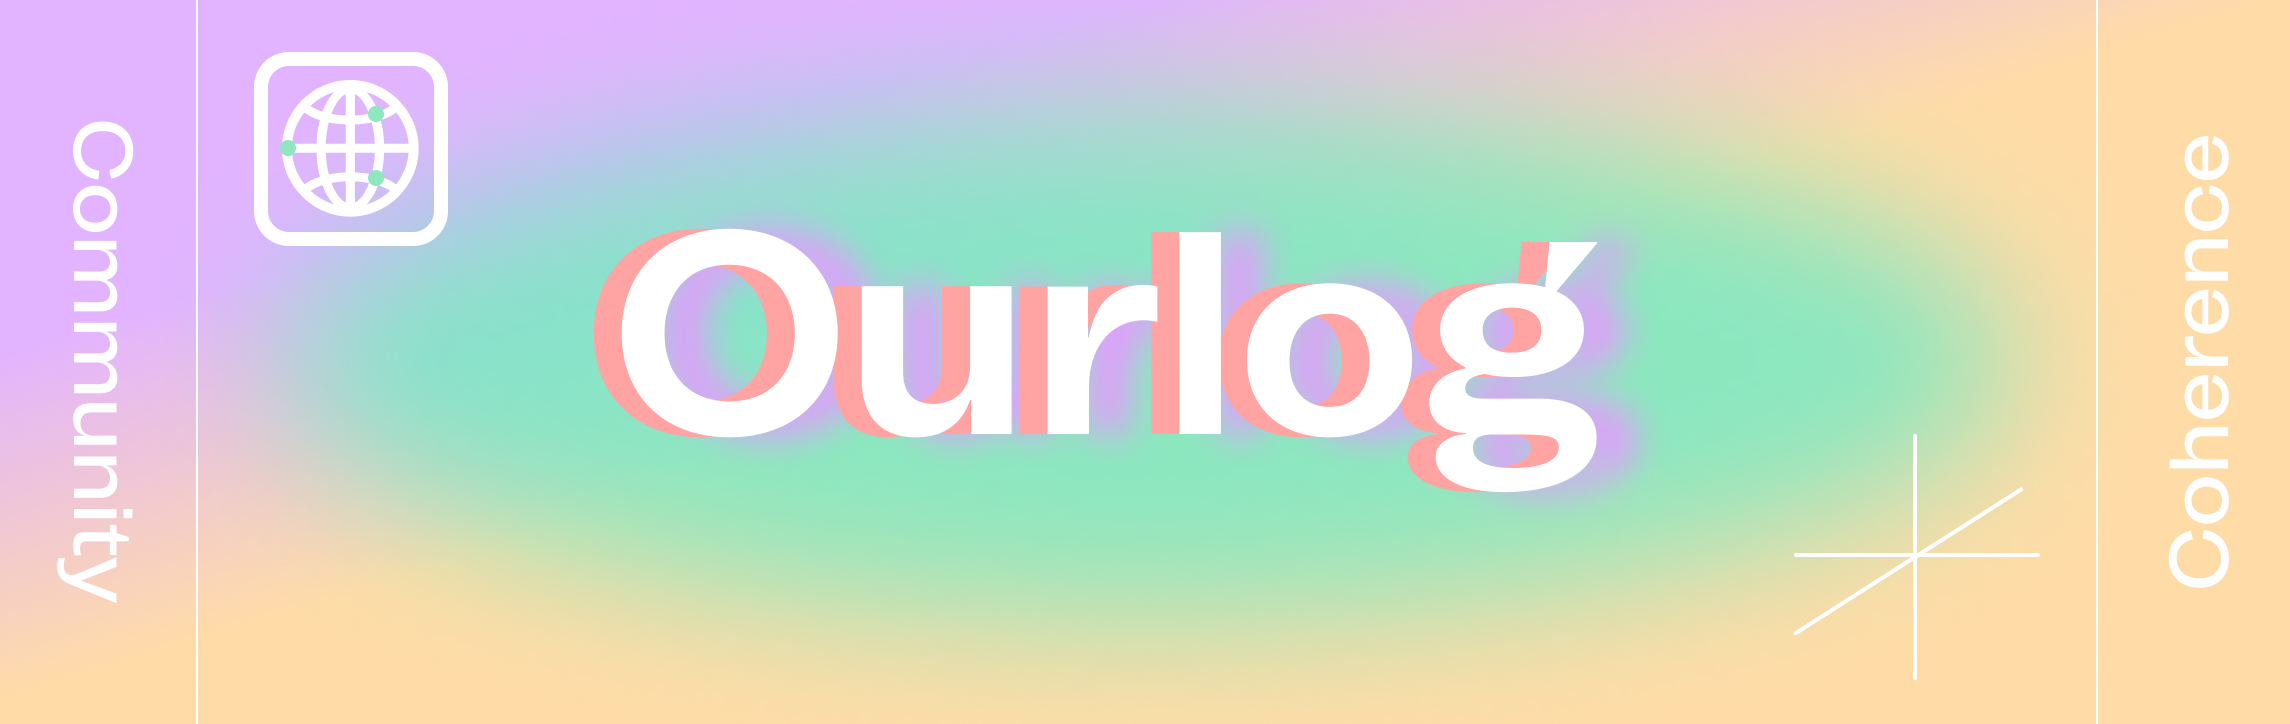 Ourlog's Gitcoin banner image, crafted by Dave